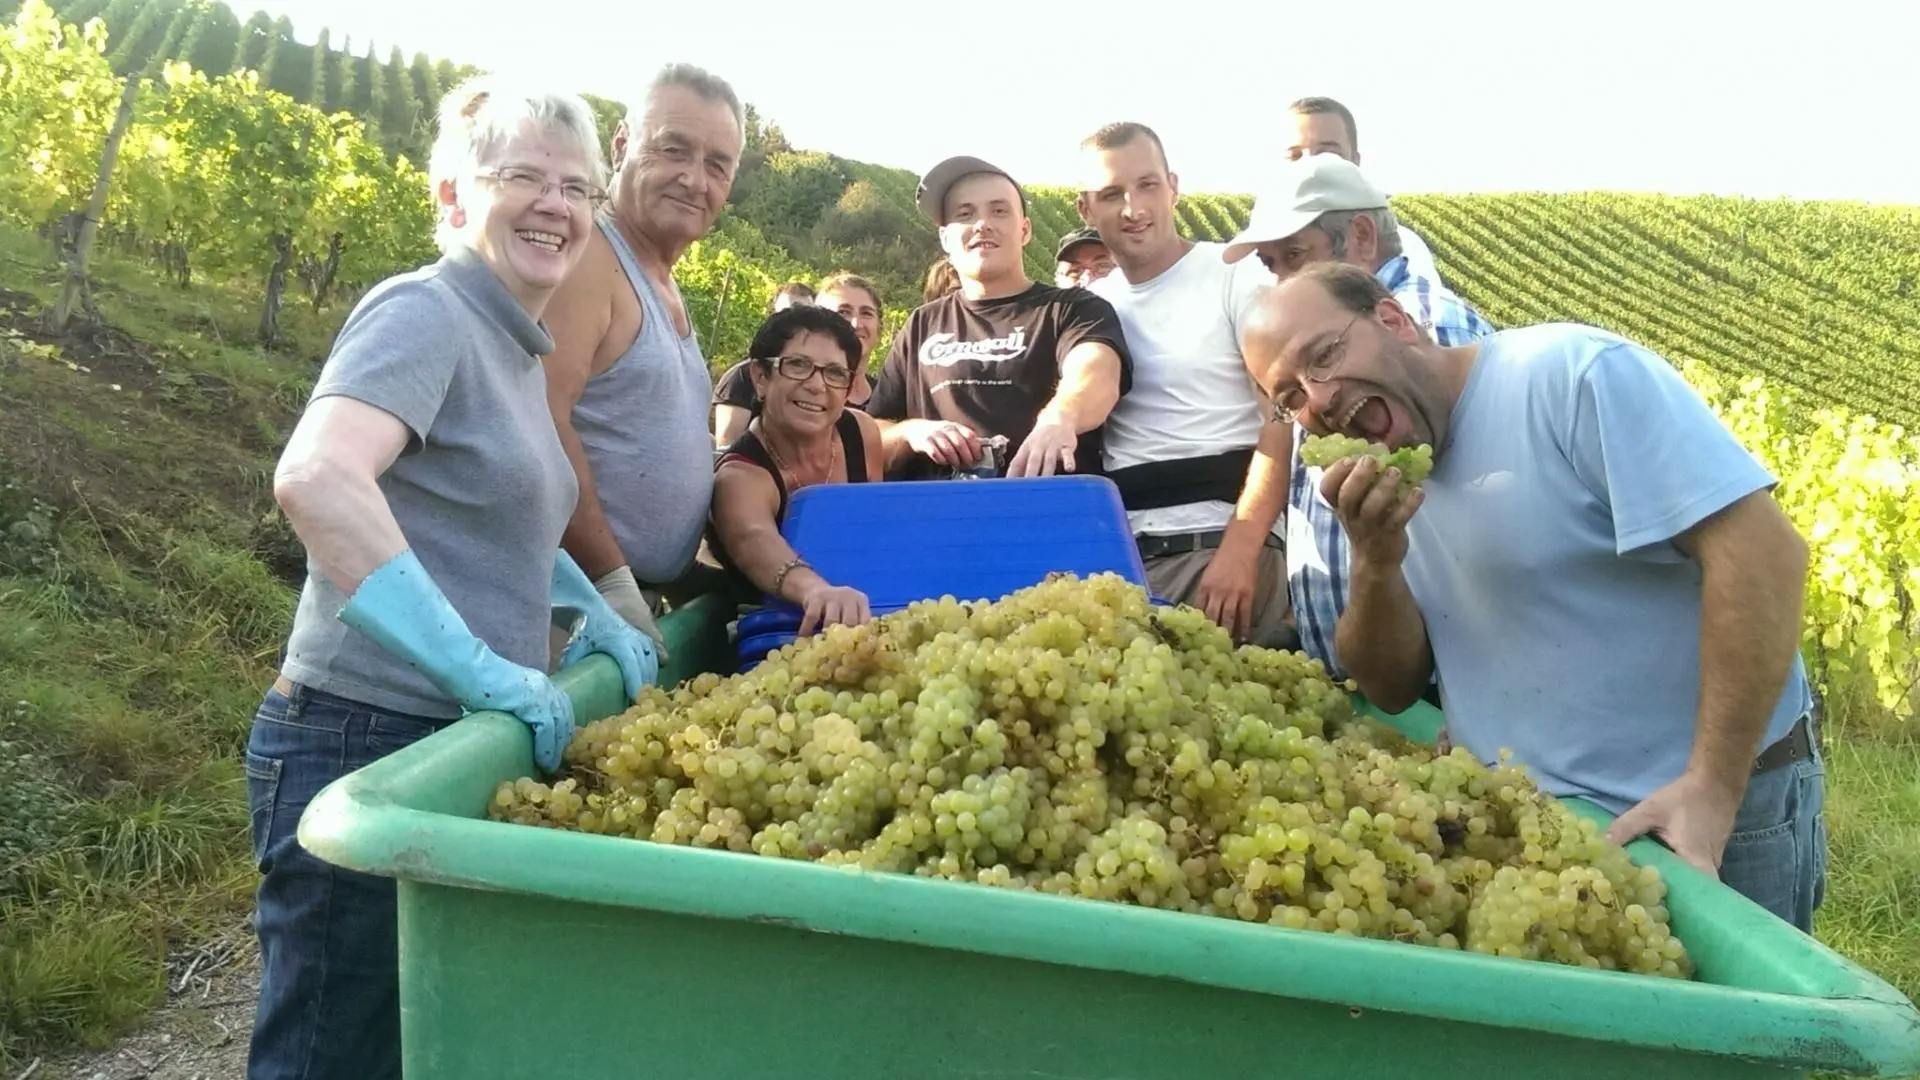 grape picking in Luxembourg, winery, grapes, harvesting